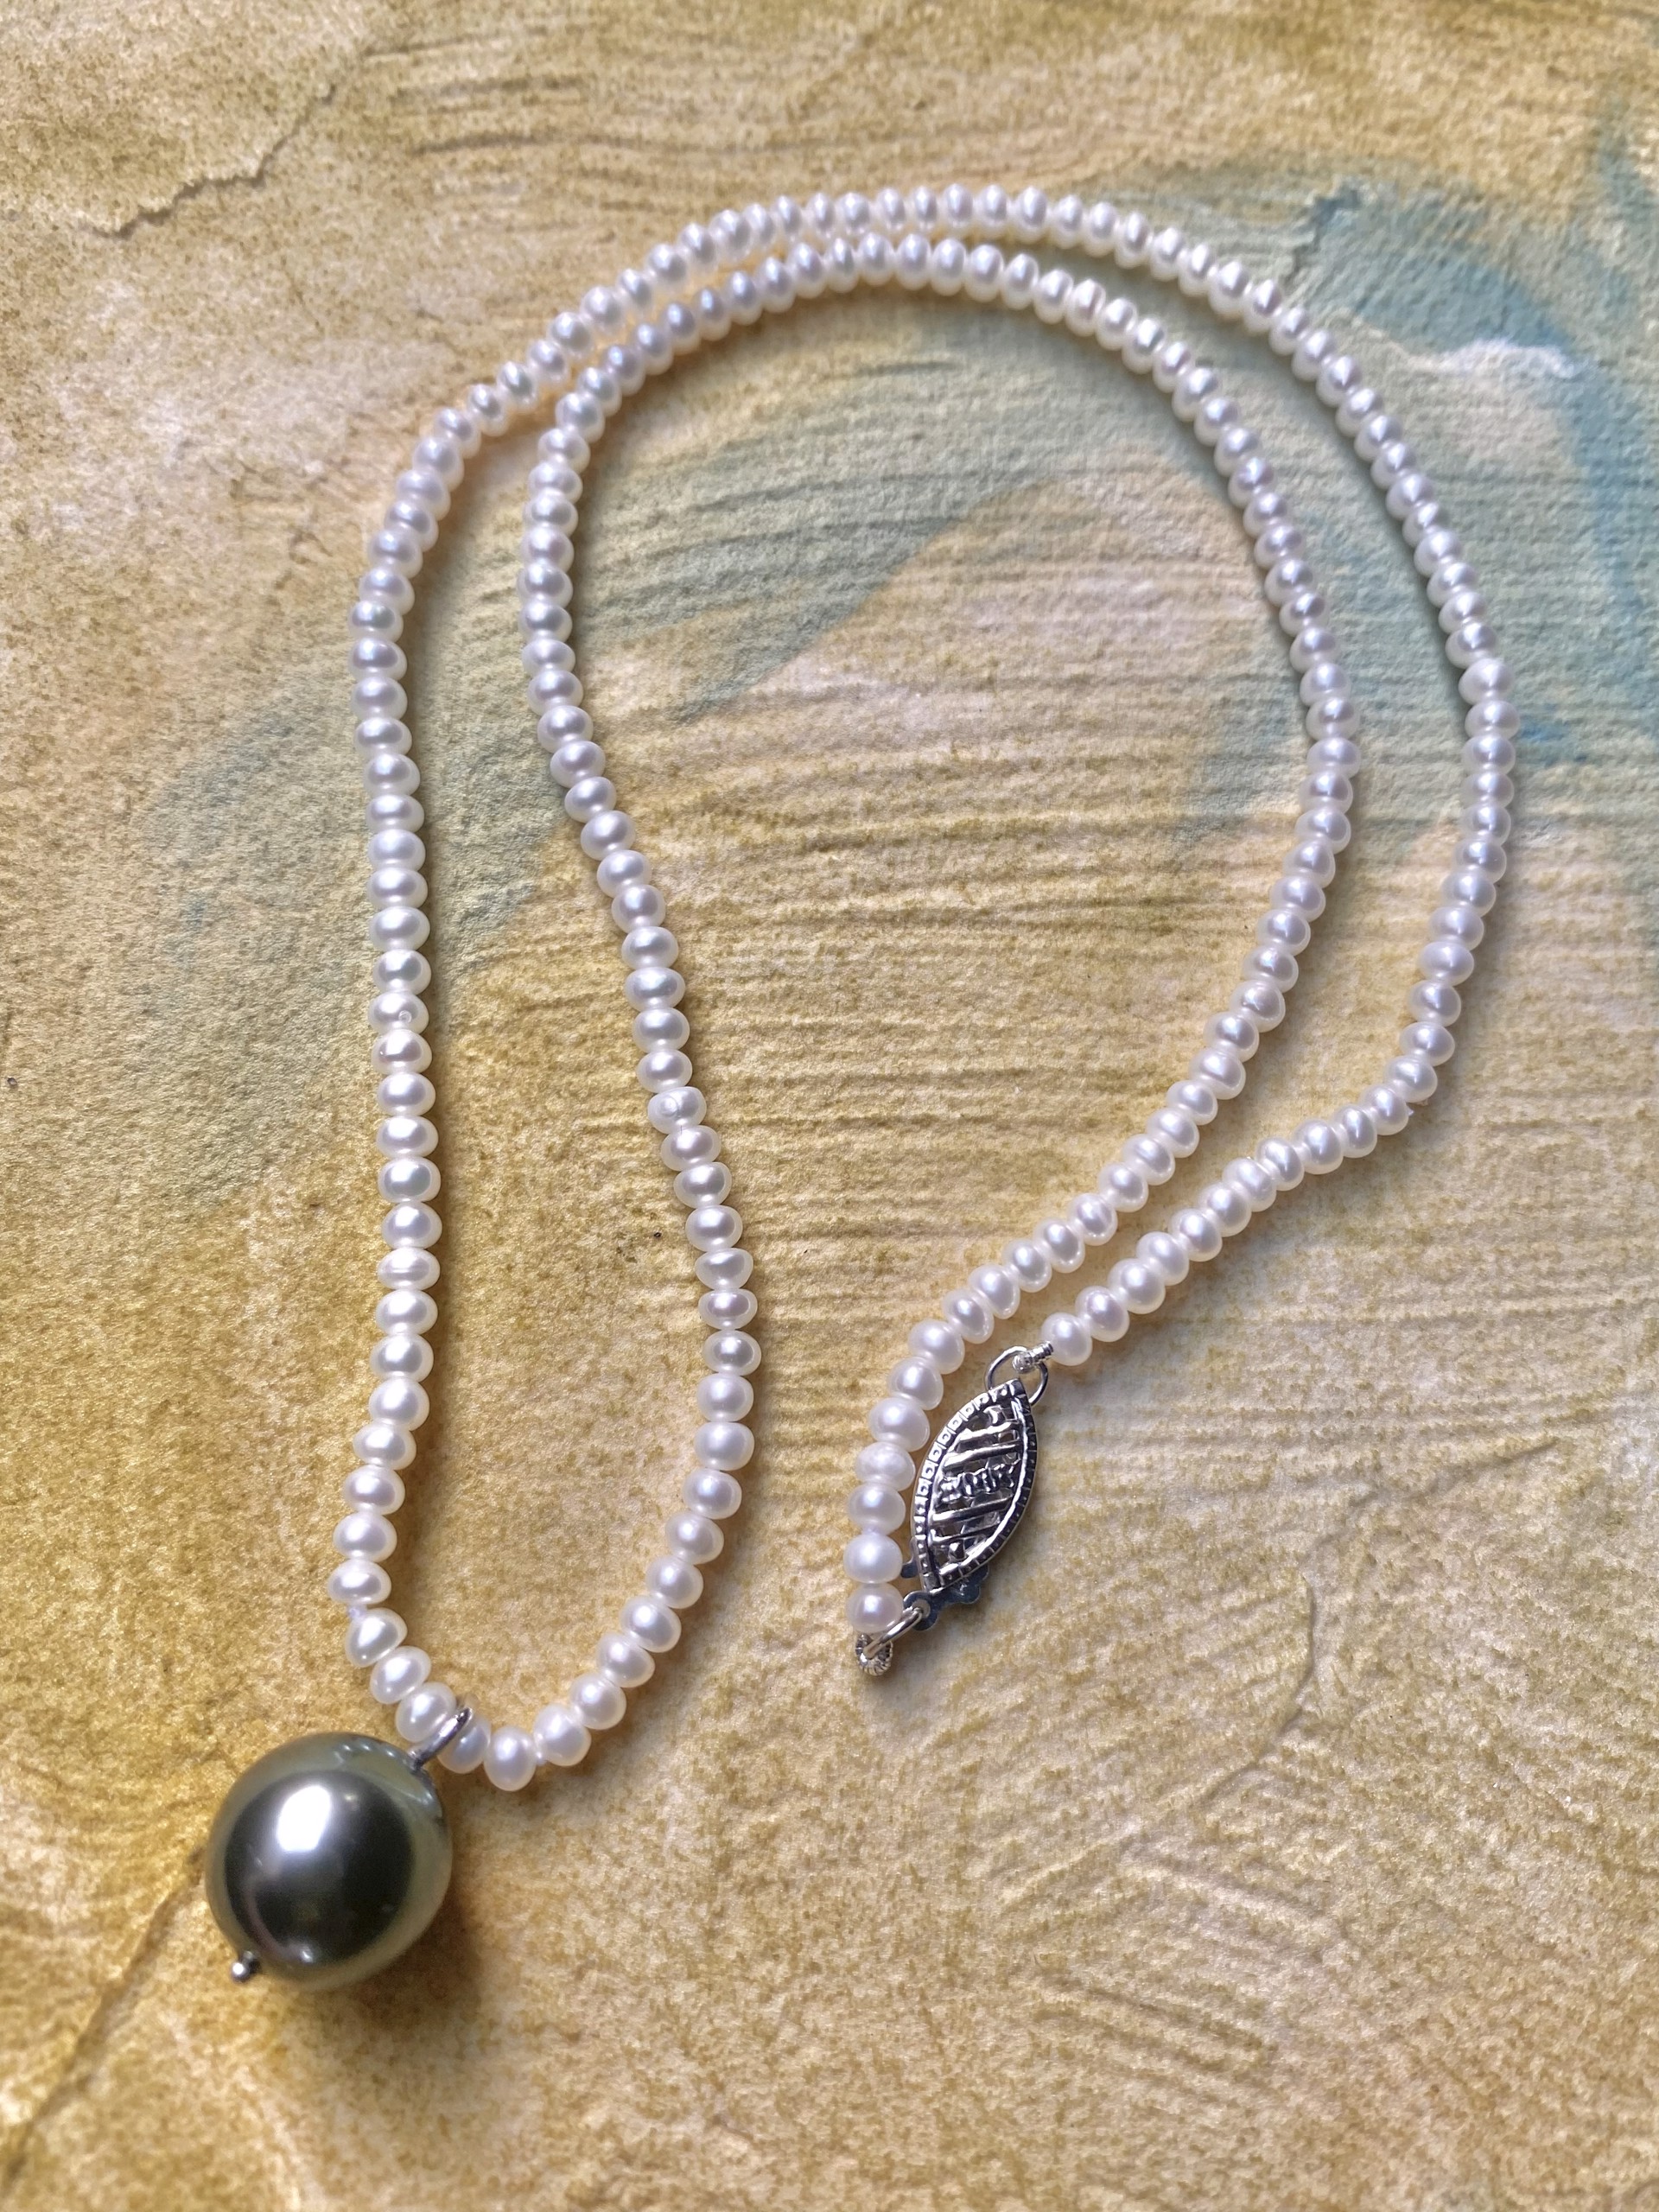 Fresh Water Pearl Button Necklace w Tahitian Round Pendant 10mm by Sidney Soriano